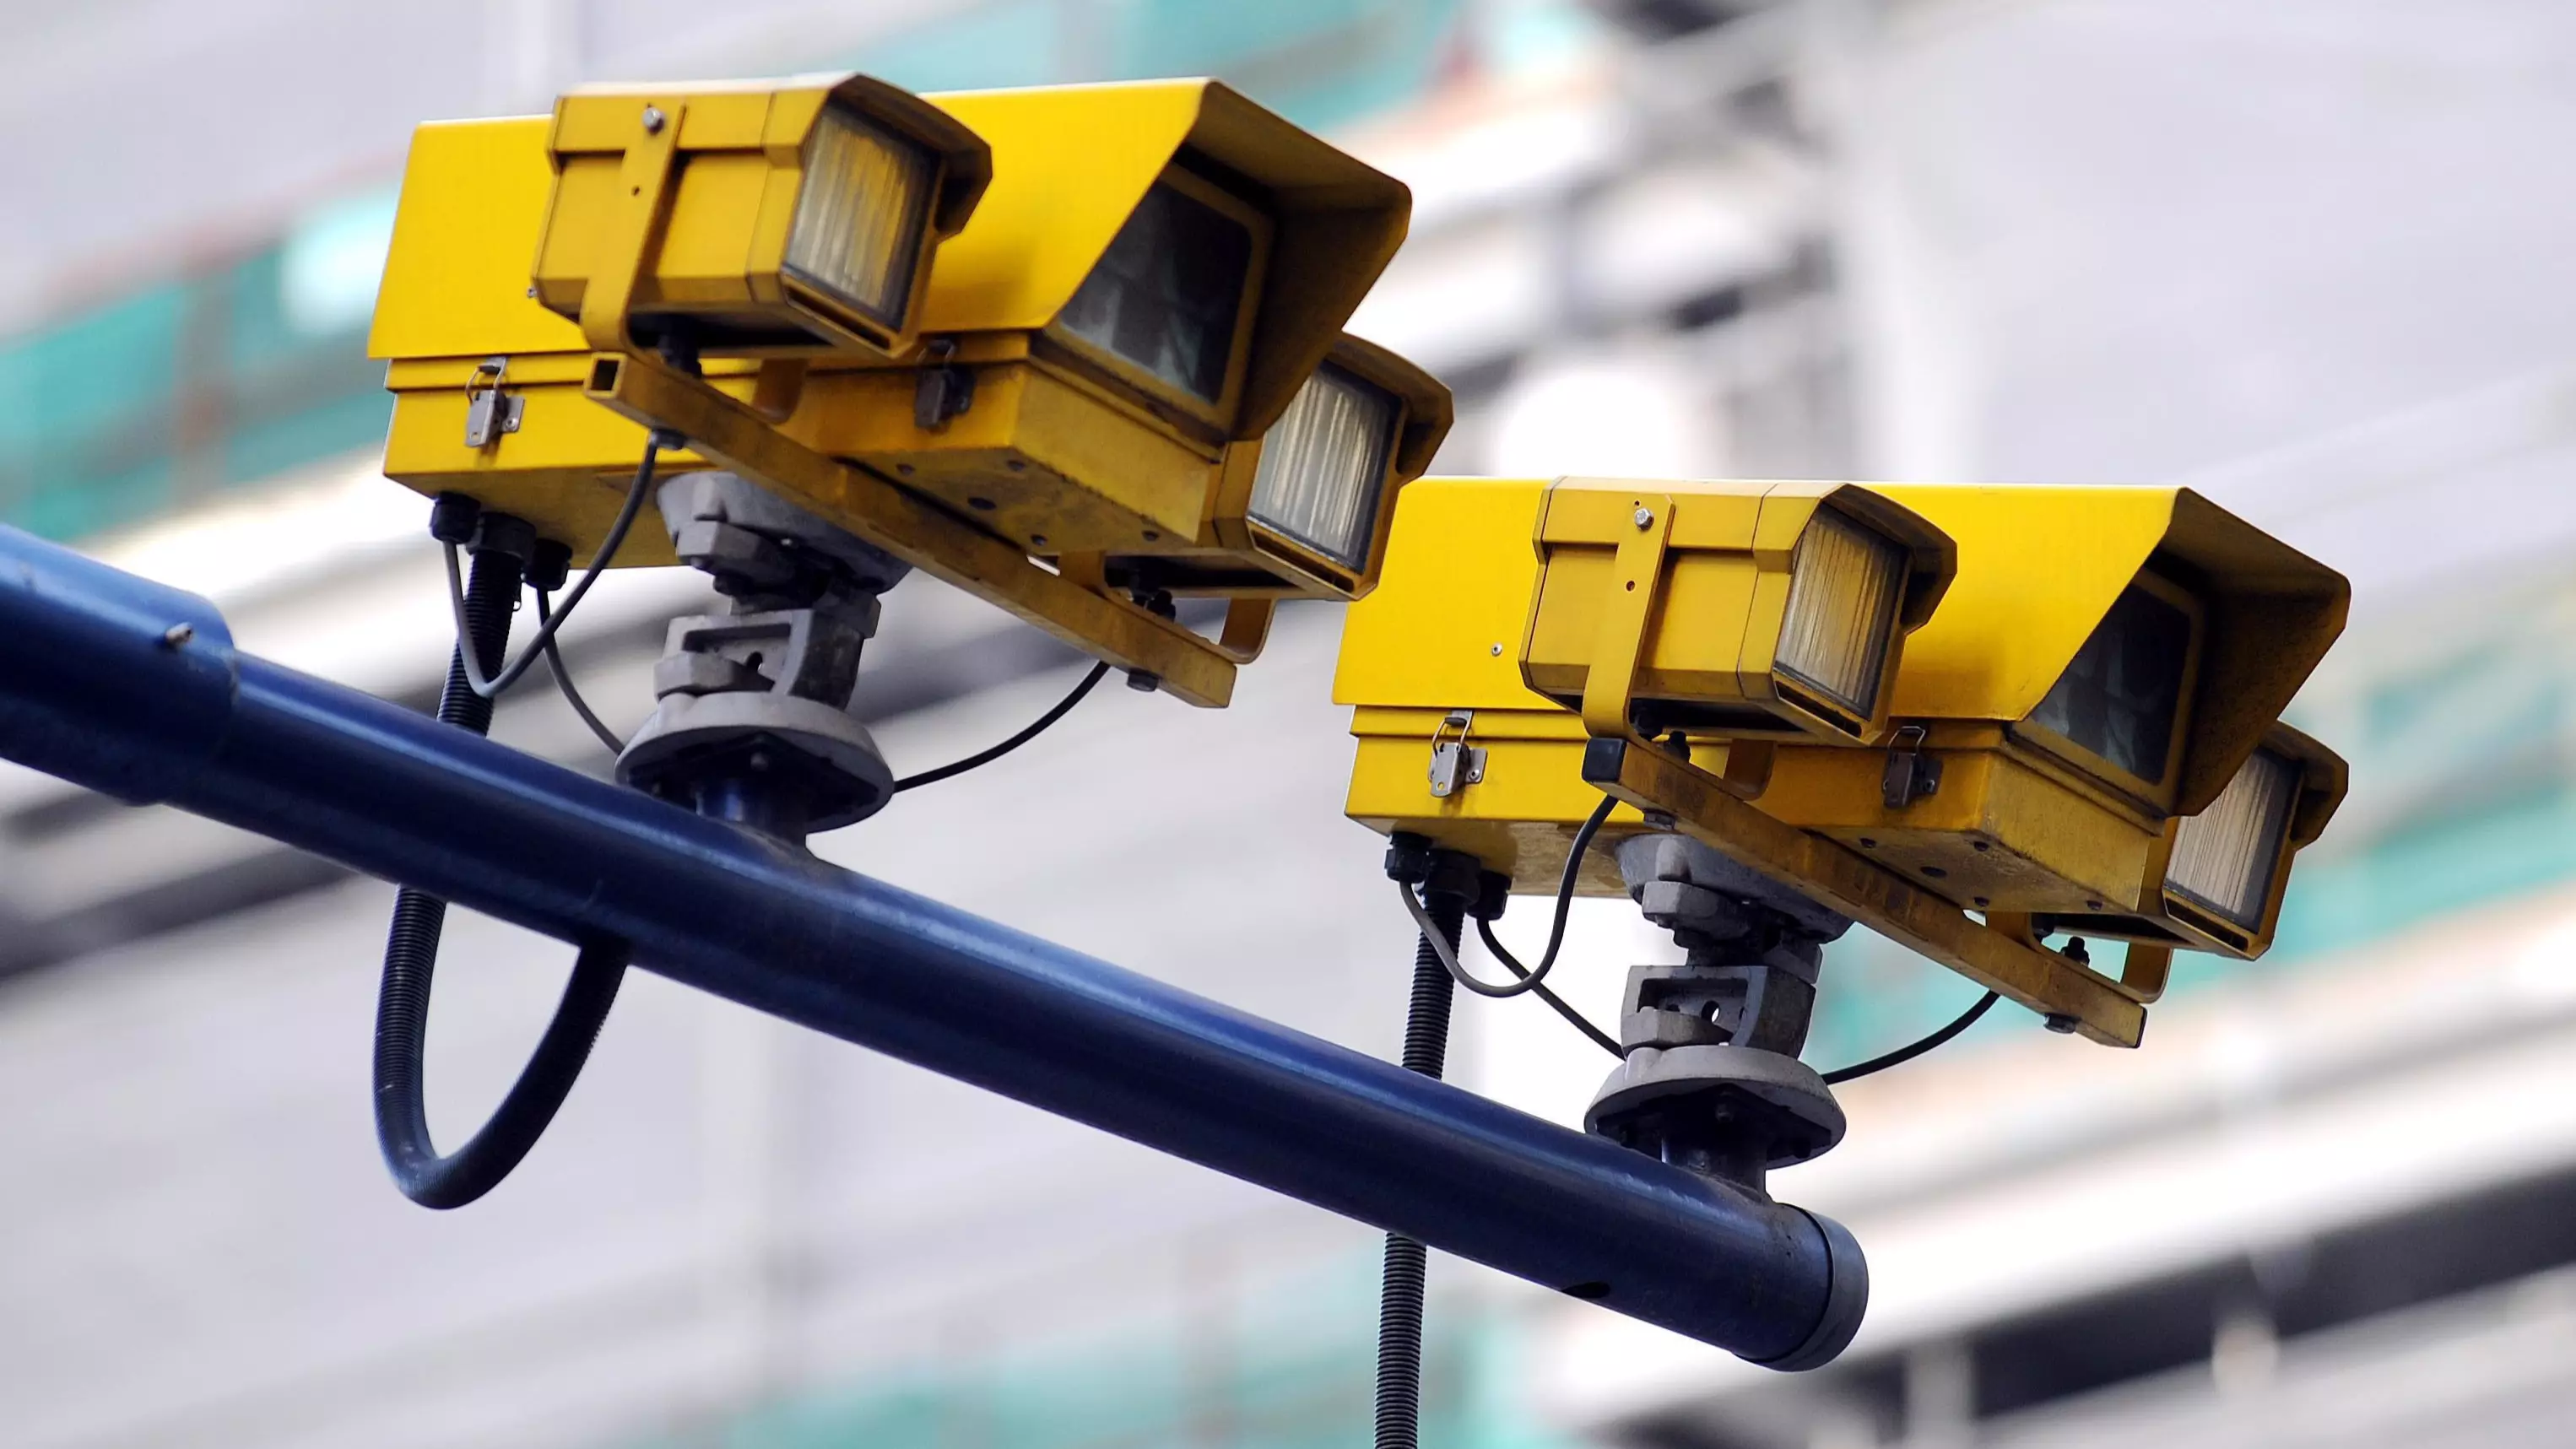 Speeding Fines To Be More Than Doubled